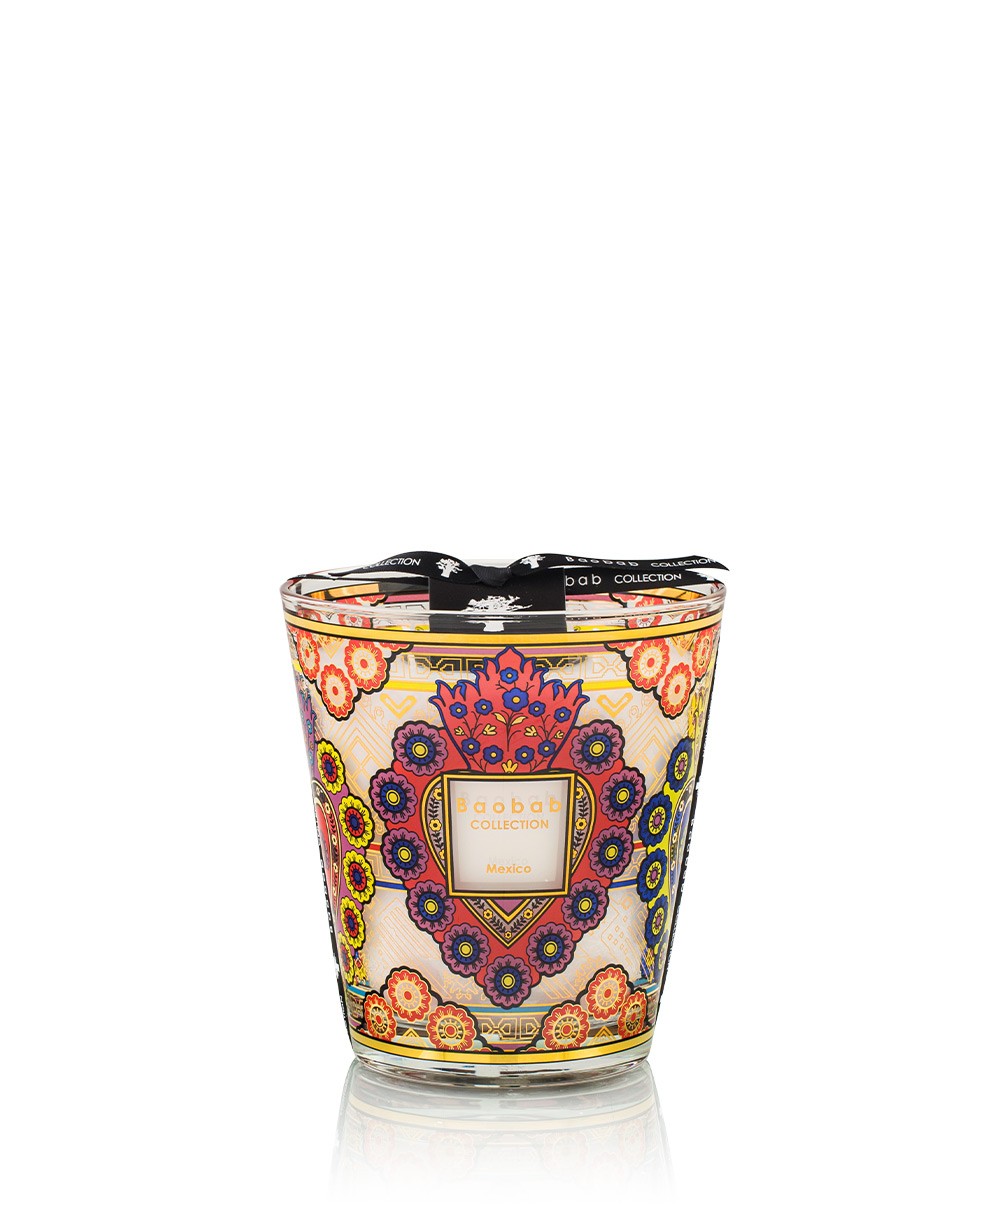 Baobab scented candle Mexico by Baobab Collection - order online